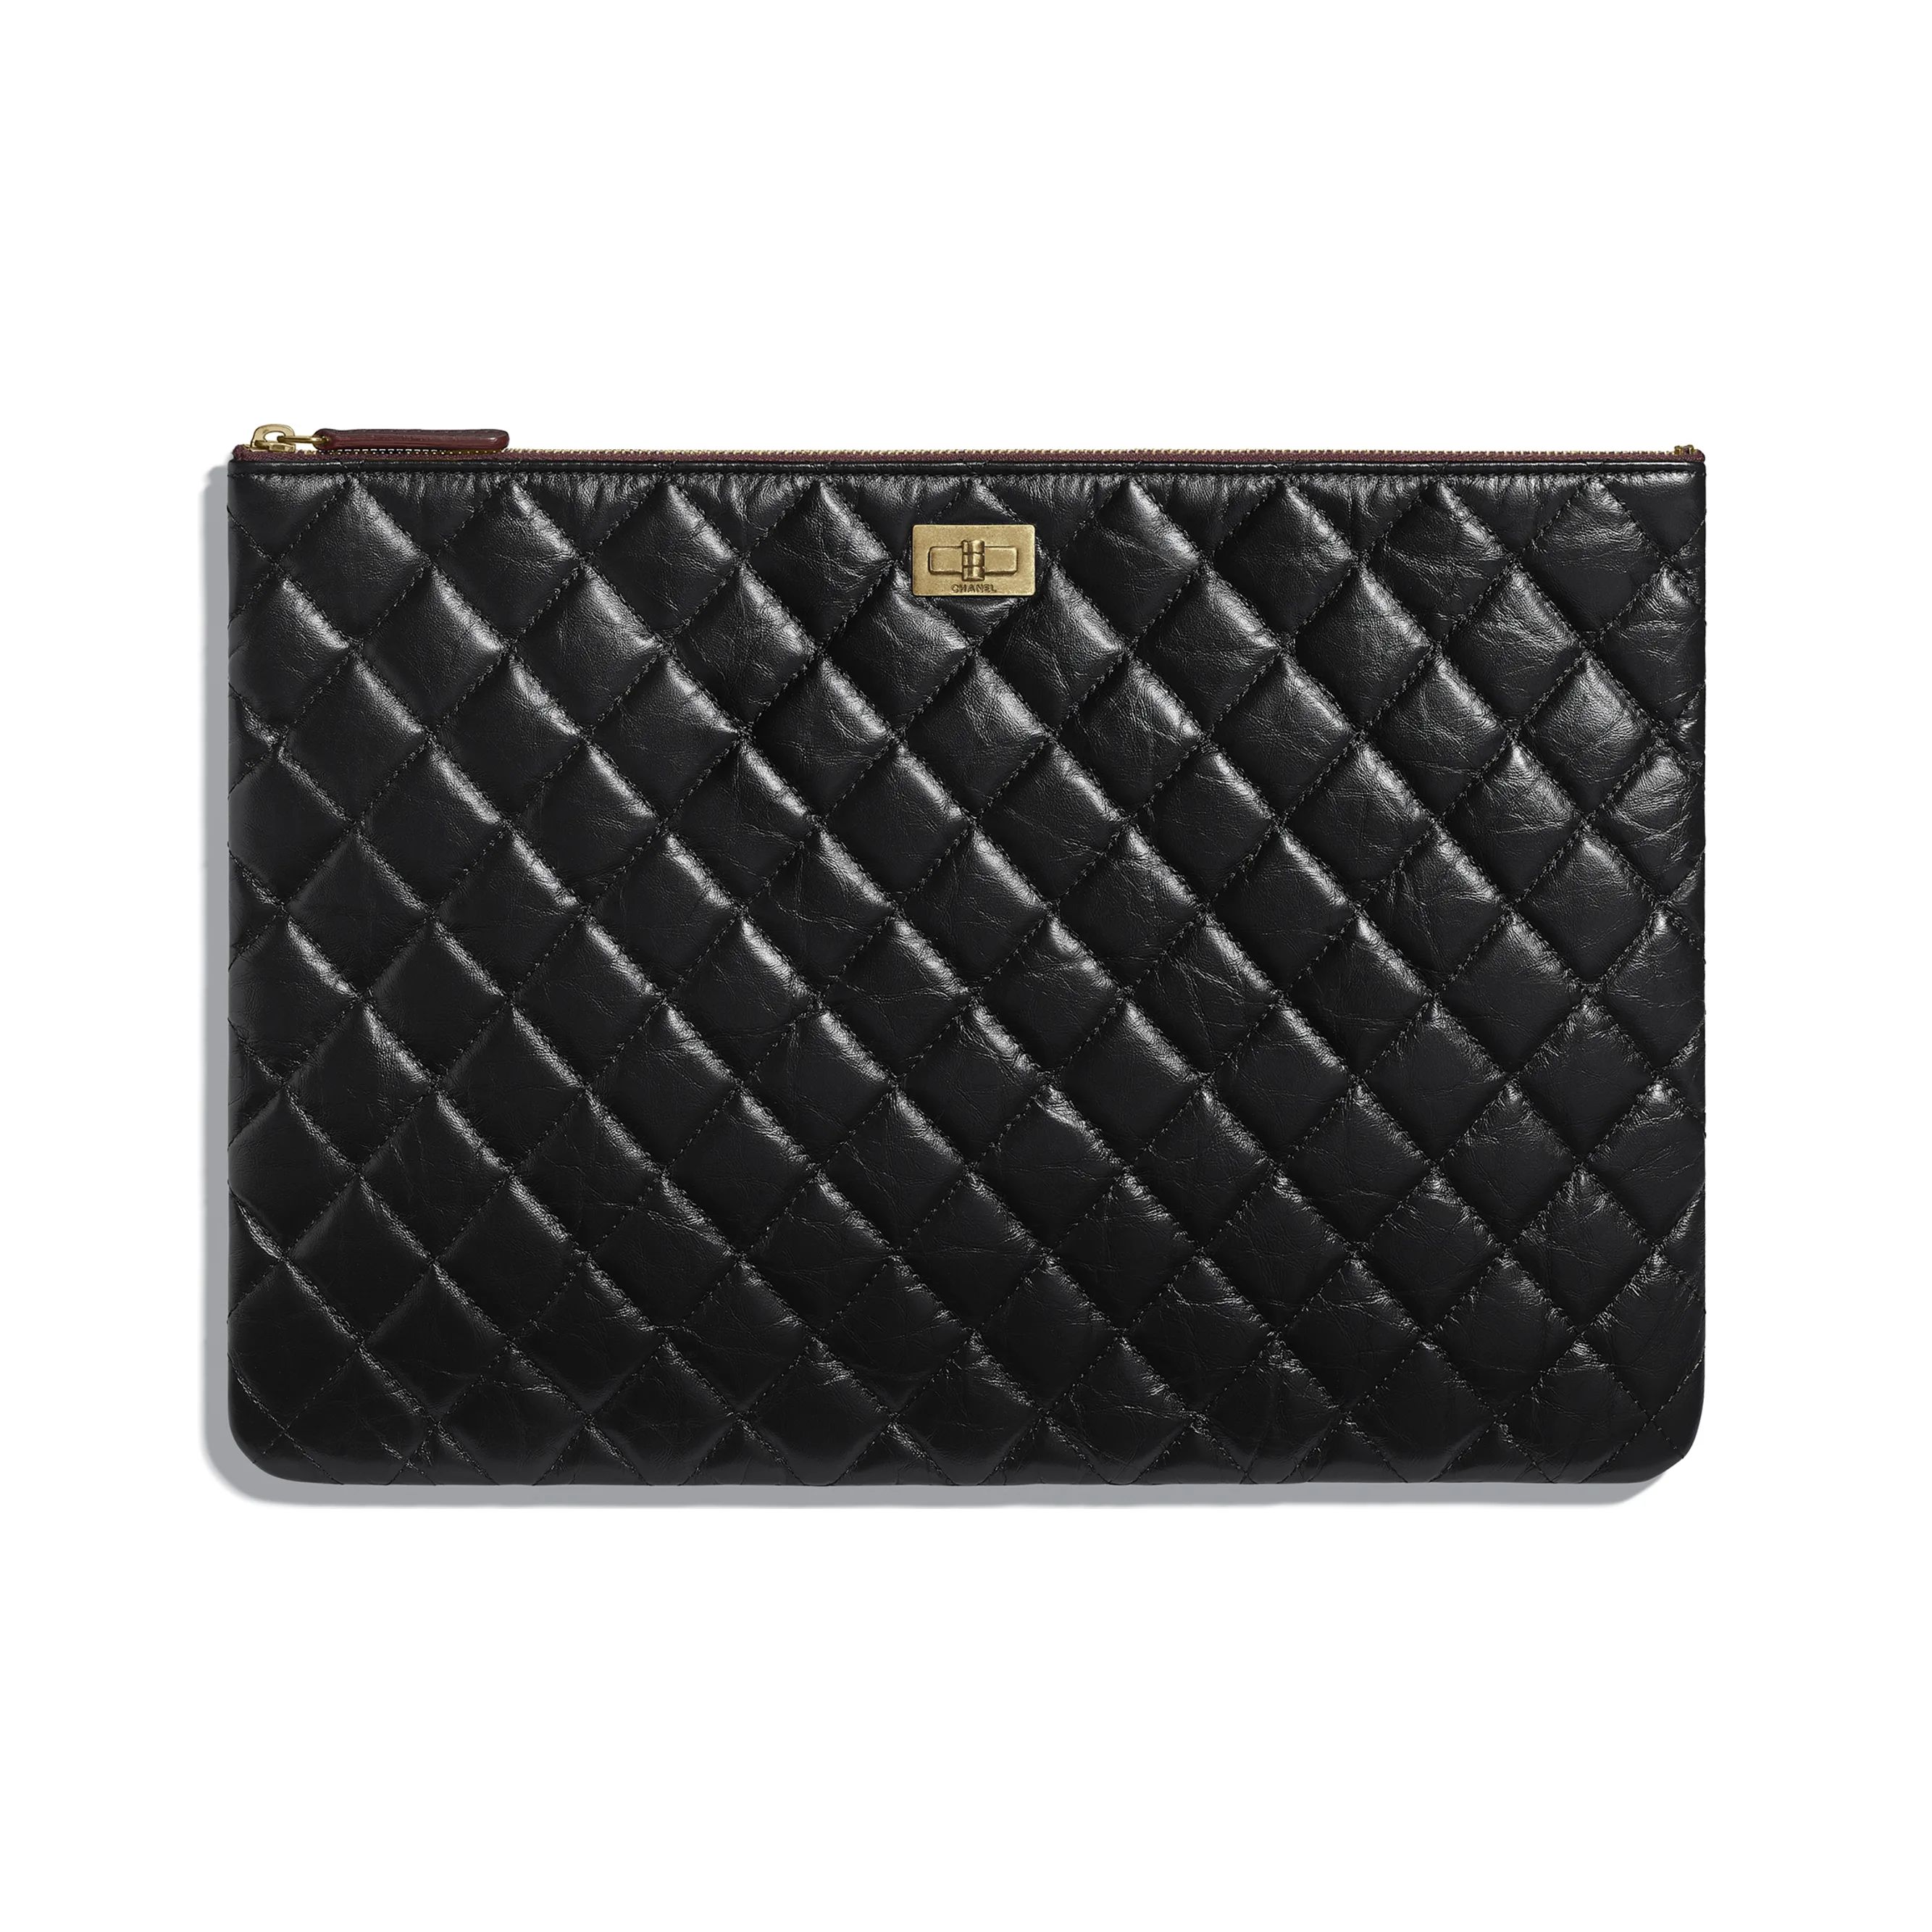 Large 2.55 Pouch | Chanel, Inc. (US)